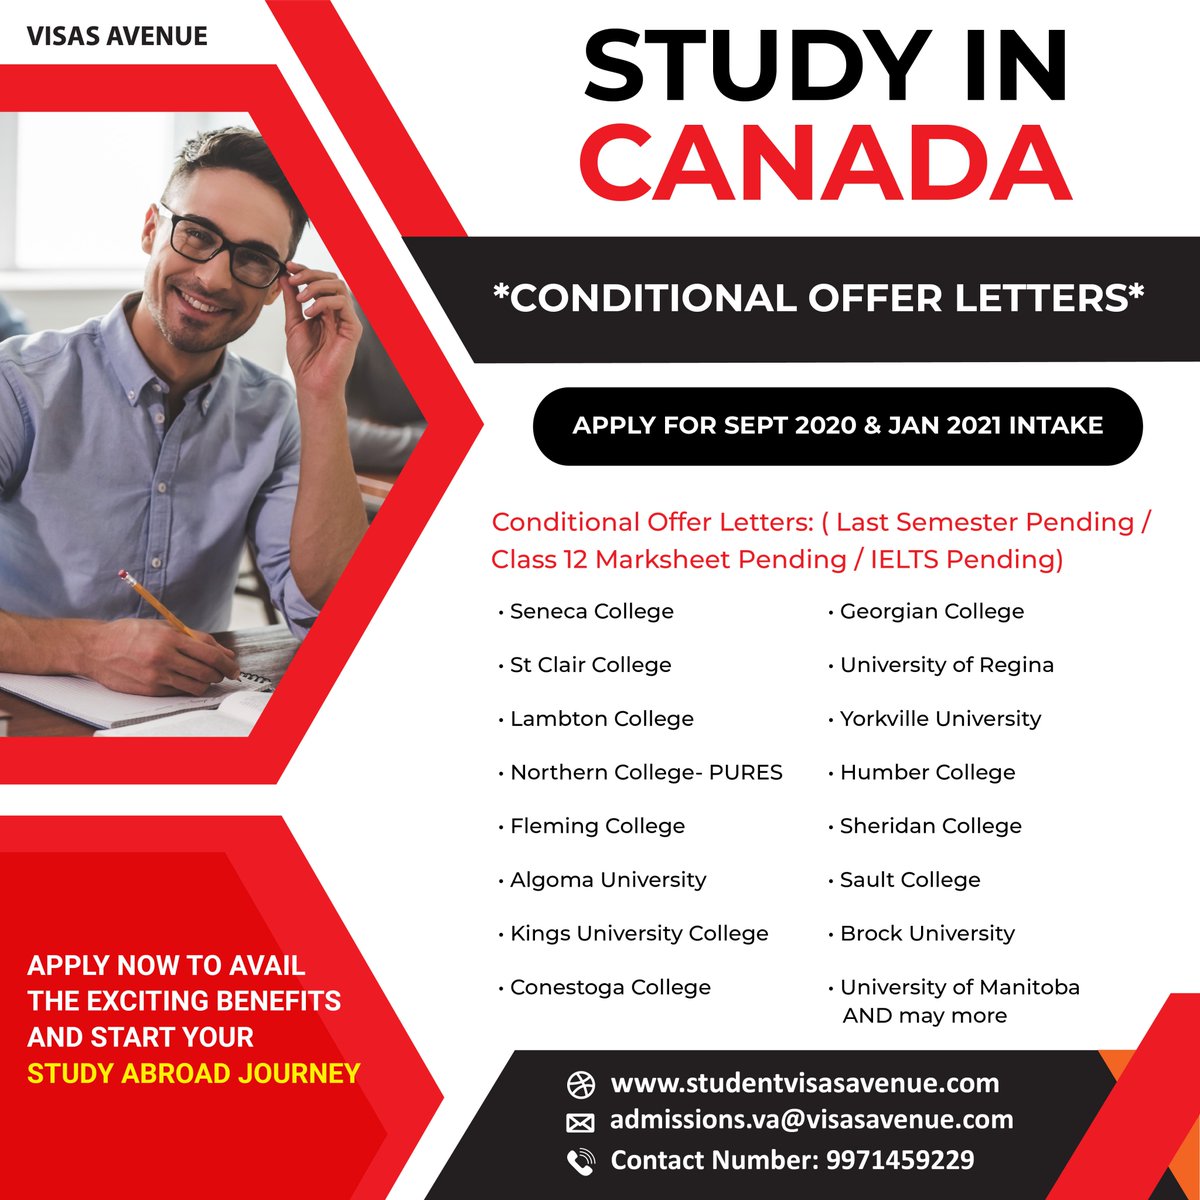 Great opportunity for international students, who wish to pursue Bachelor or Master Degree in Canada!

Apply Now !!: bit.ly/2Zjo71l

#studentvisacanada #studyincanada #studyabroadcanada #studyoverseascanada #canadauniversities